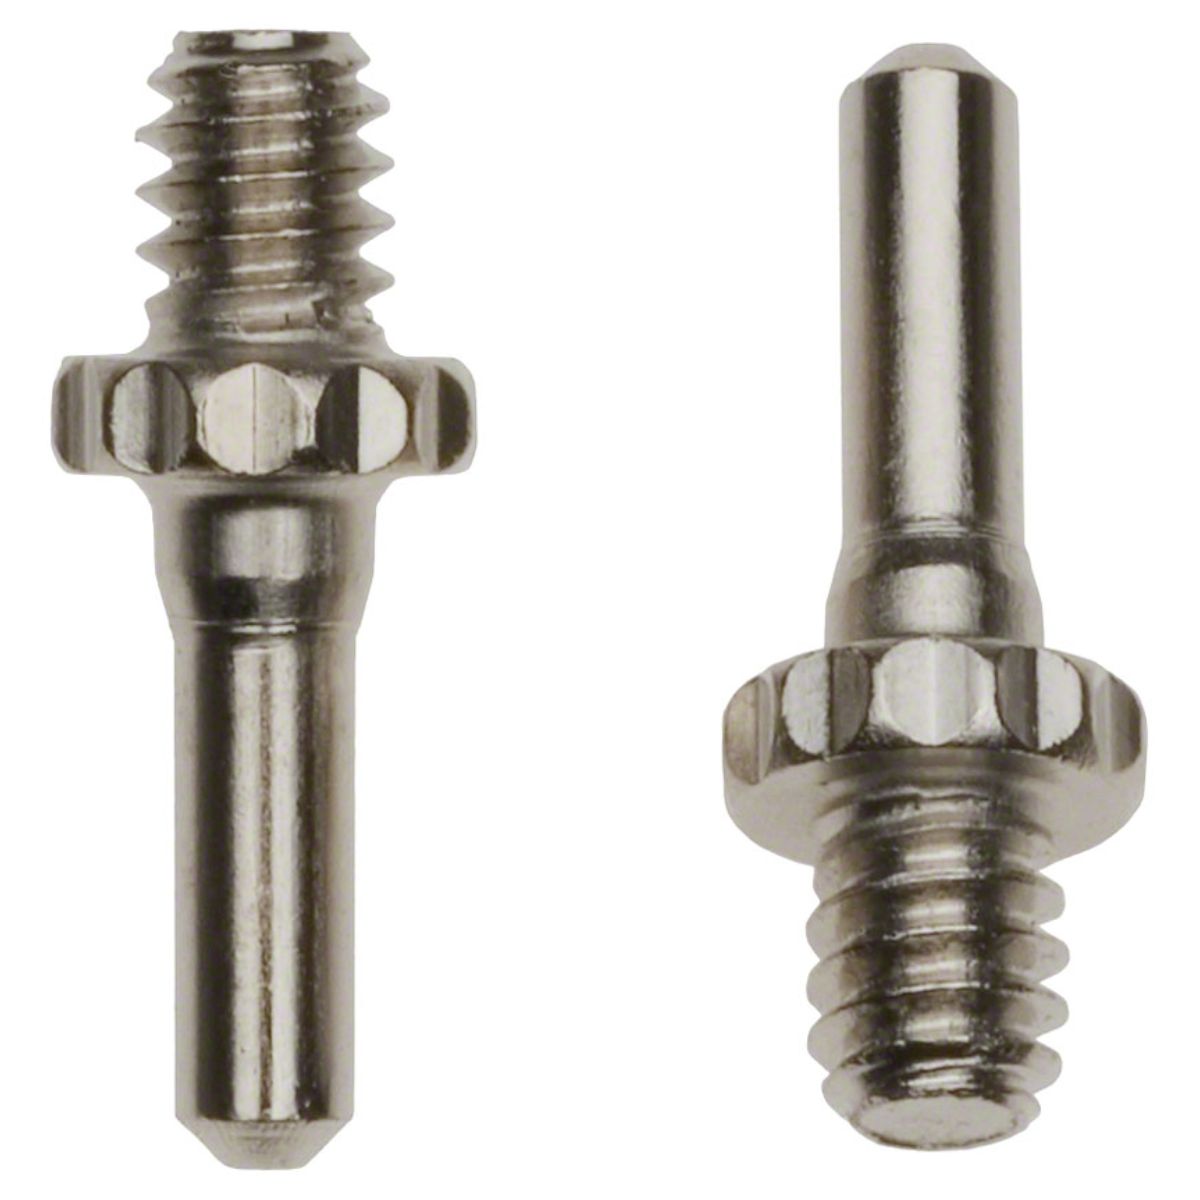 Park Tool Chain Tool Pin for CT2, CT-3, CT-5 and CT-7, Card of 2